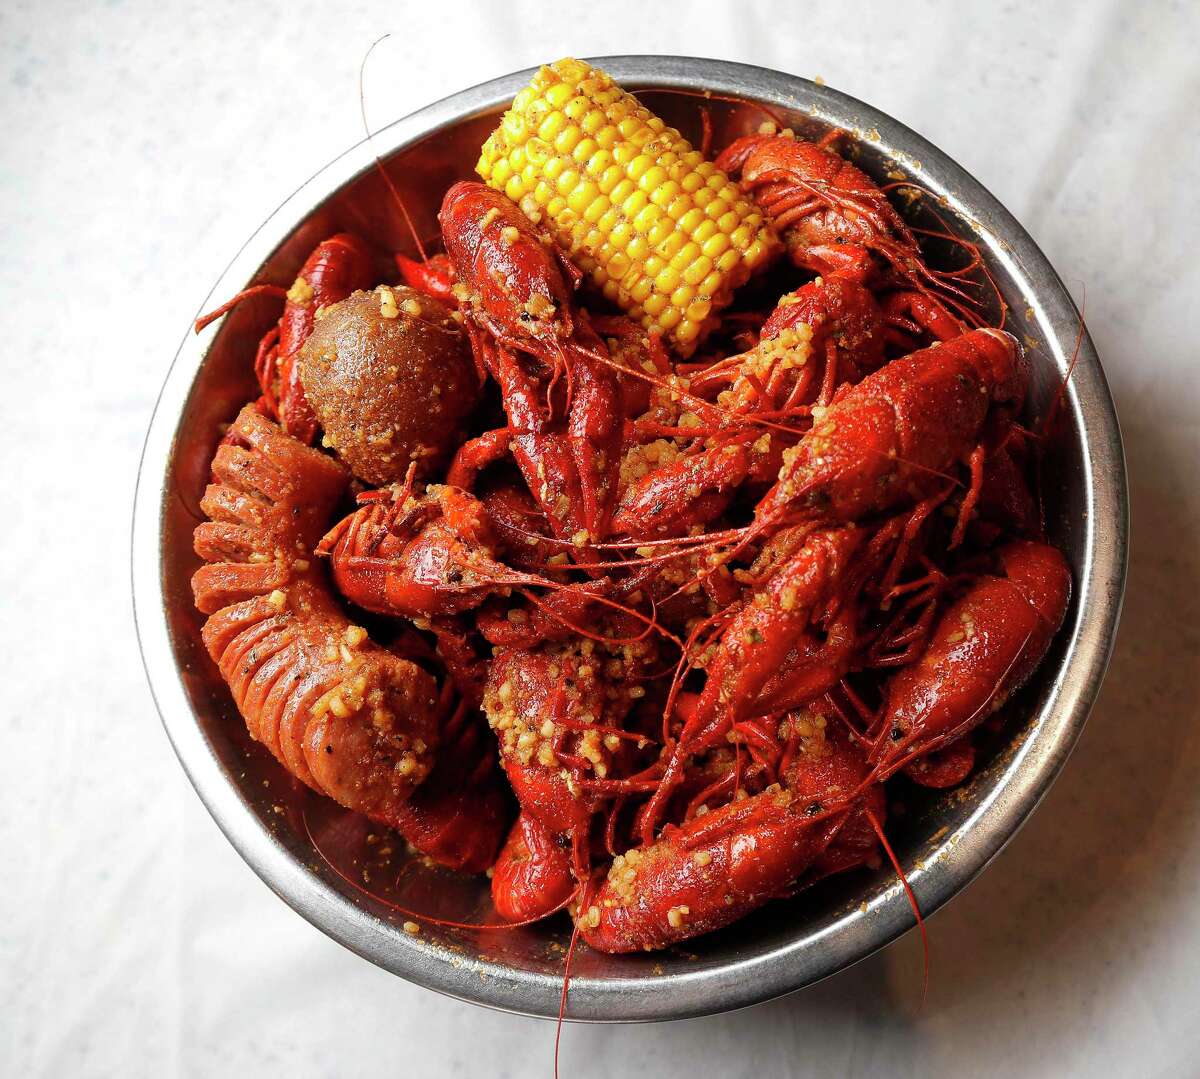 Ryan Pera: Agricole Hospitality  "Viet-Cajun crawfish. Like our city, this dish is a confluence of culture and backgrounds that work together harmoniously. And, it's simply delicious. My favorite spot is Crawfish and Noodles."